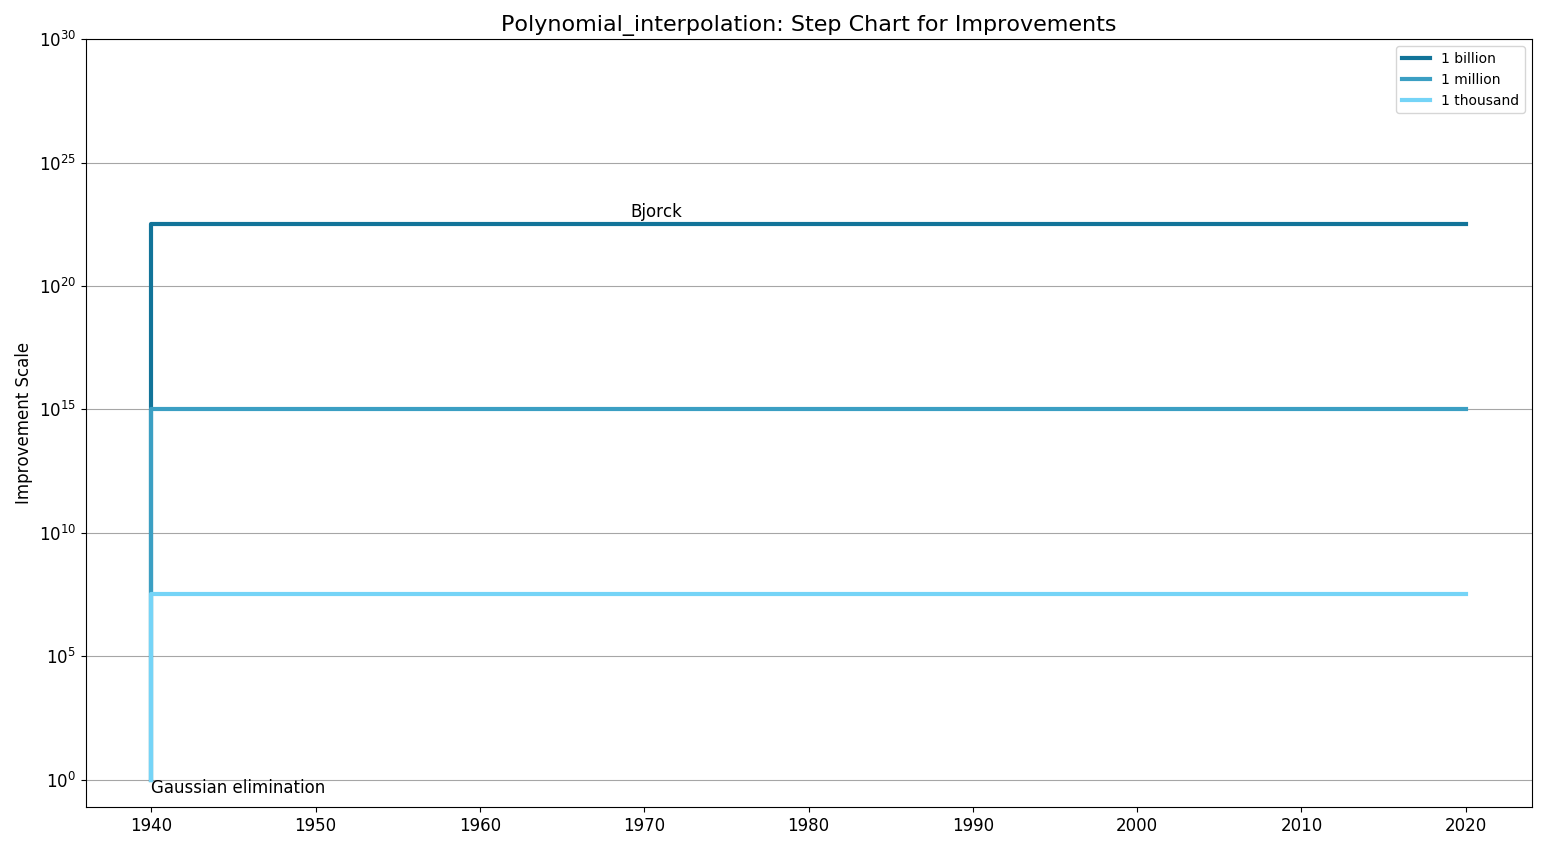 Polynomial interpolationStepChart.png